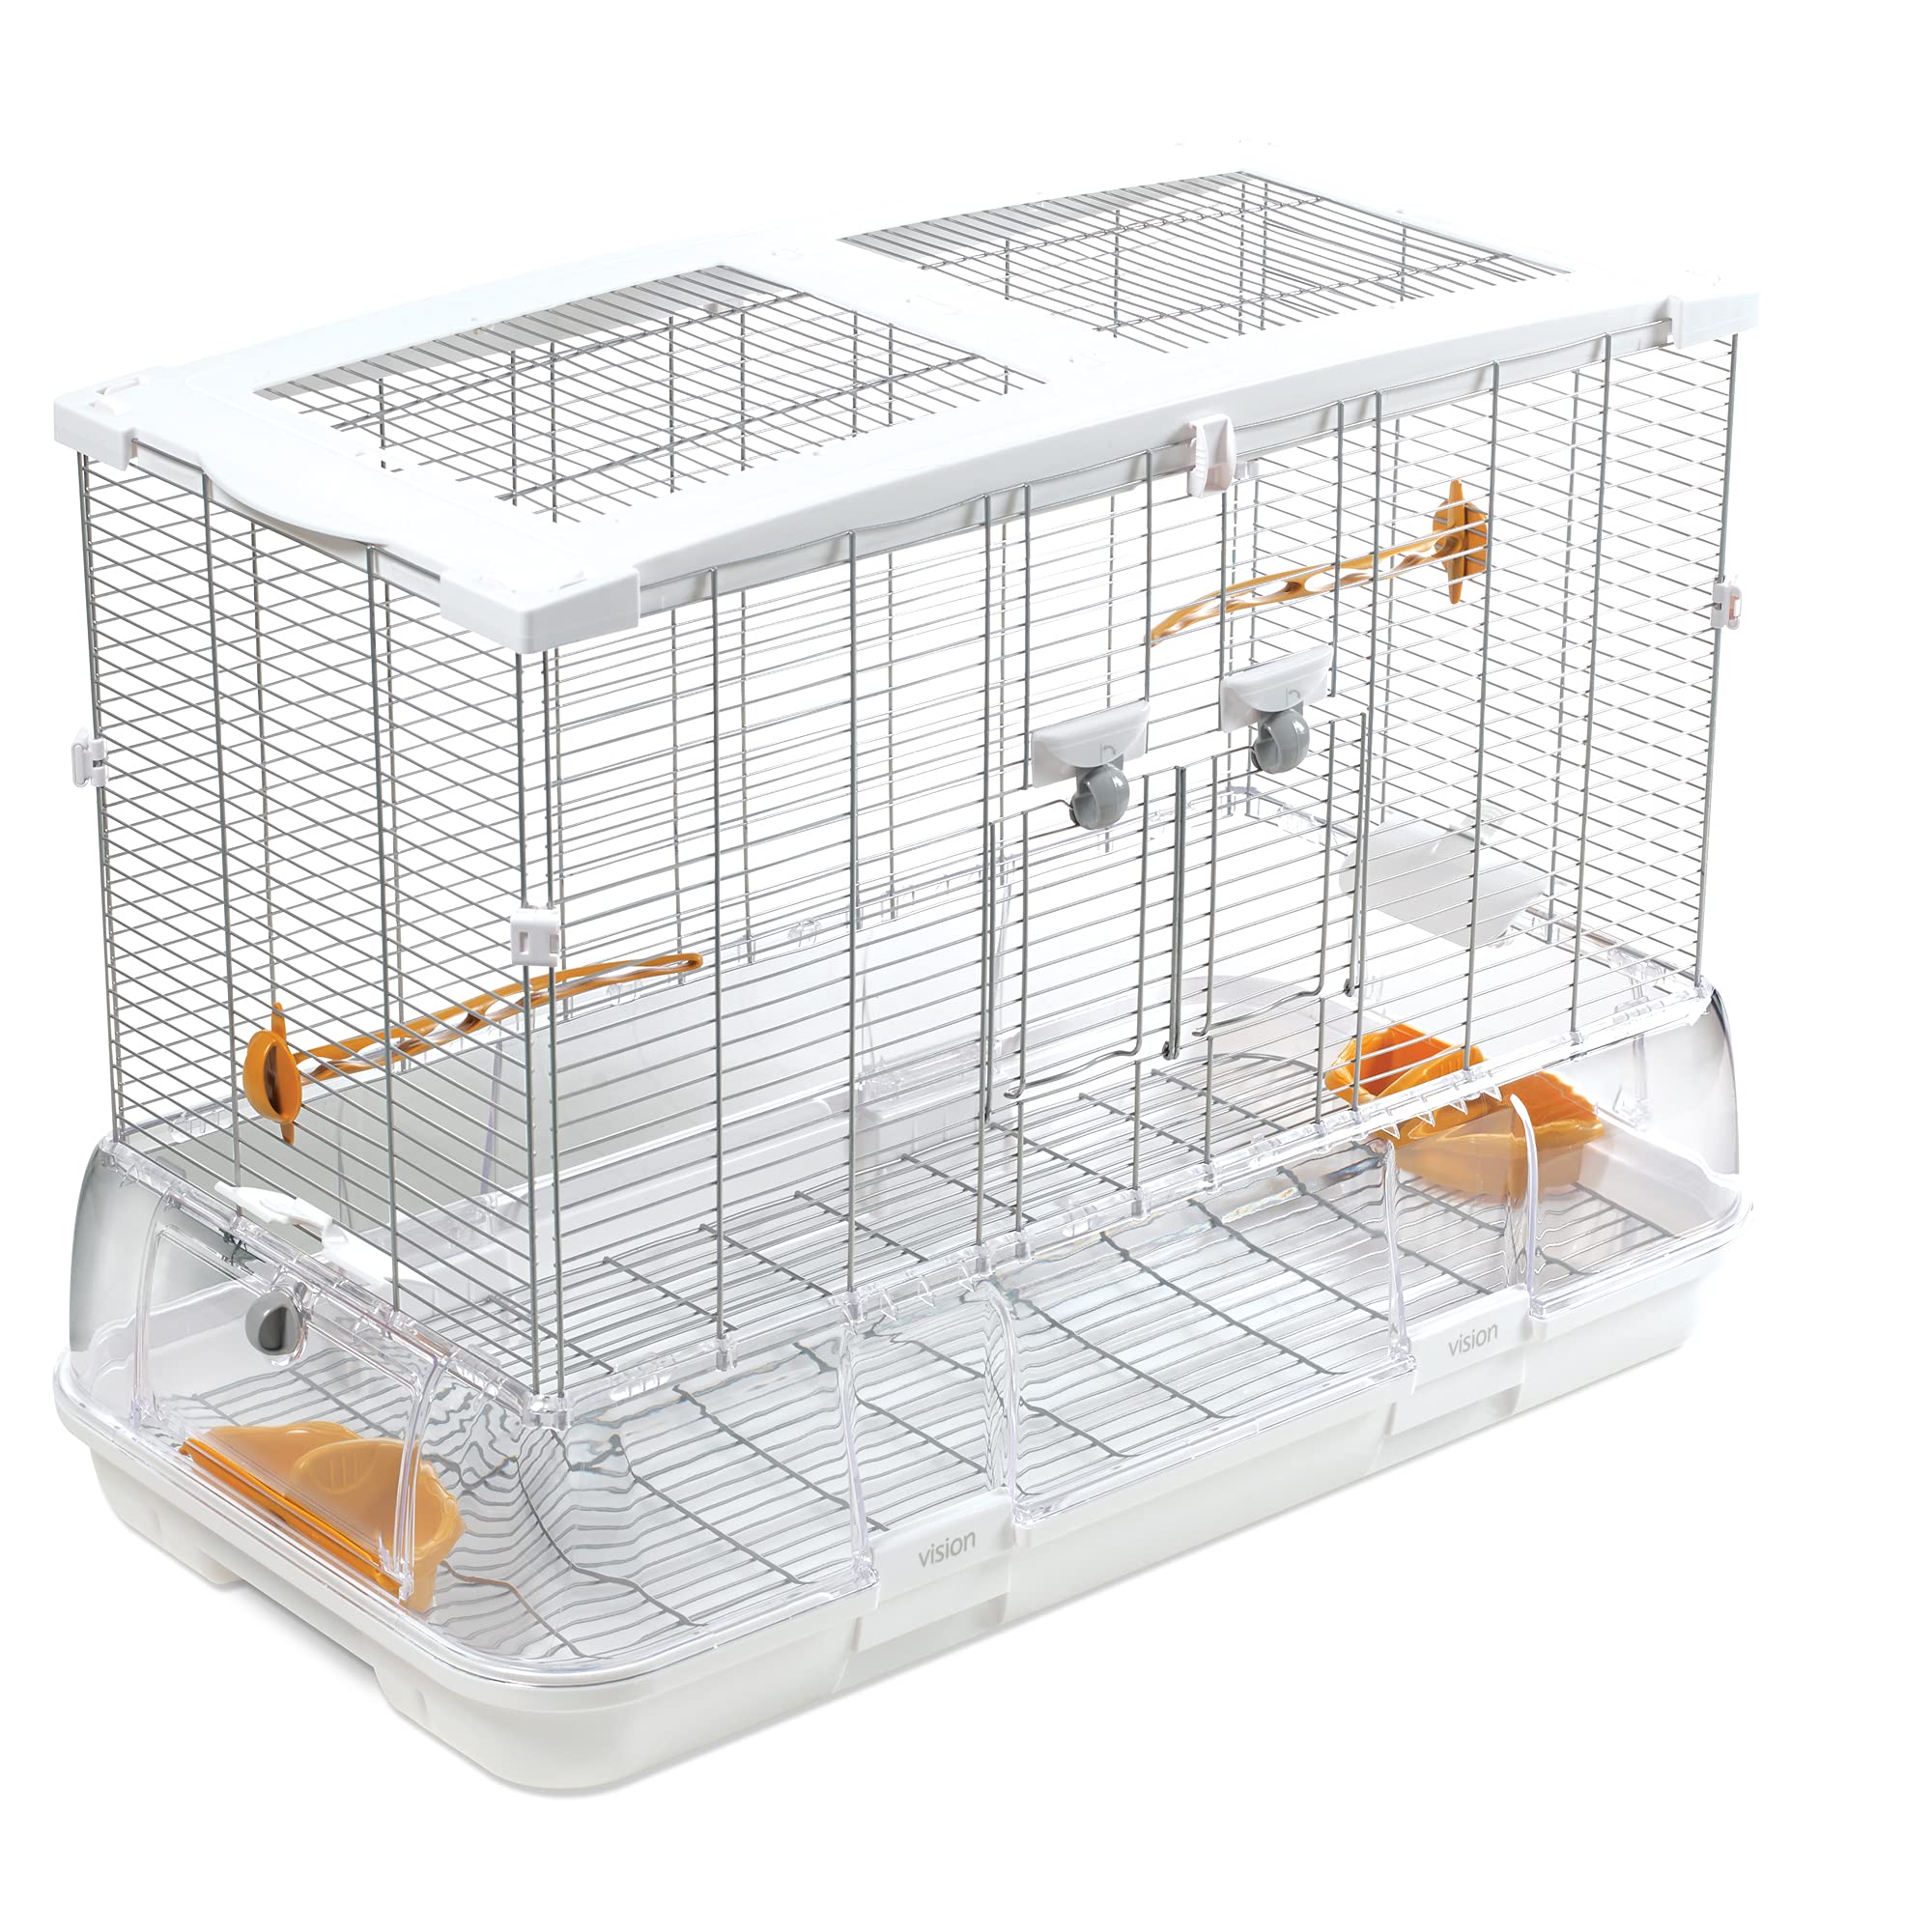 Hari Vision L01 Wire Bird cage Bird HomeAfor Parakeets Finches and canaries Large